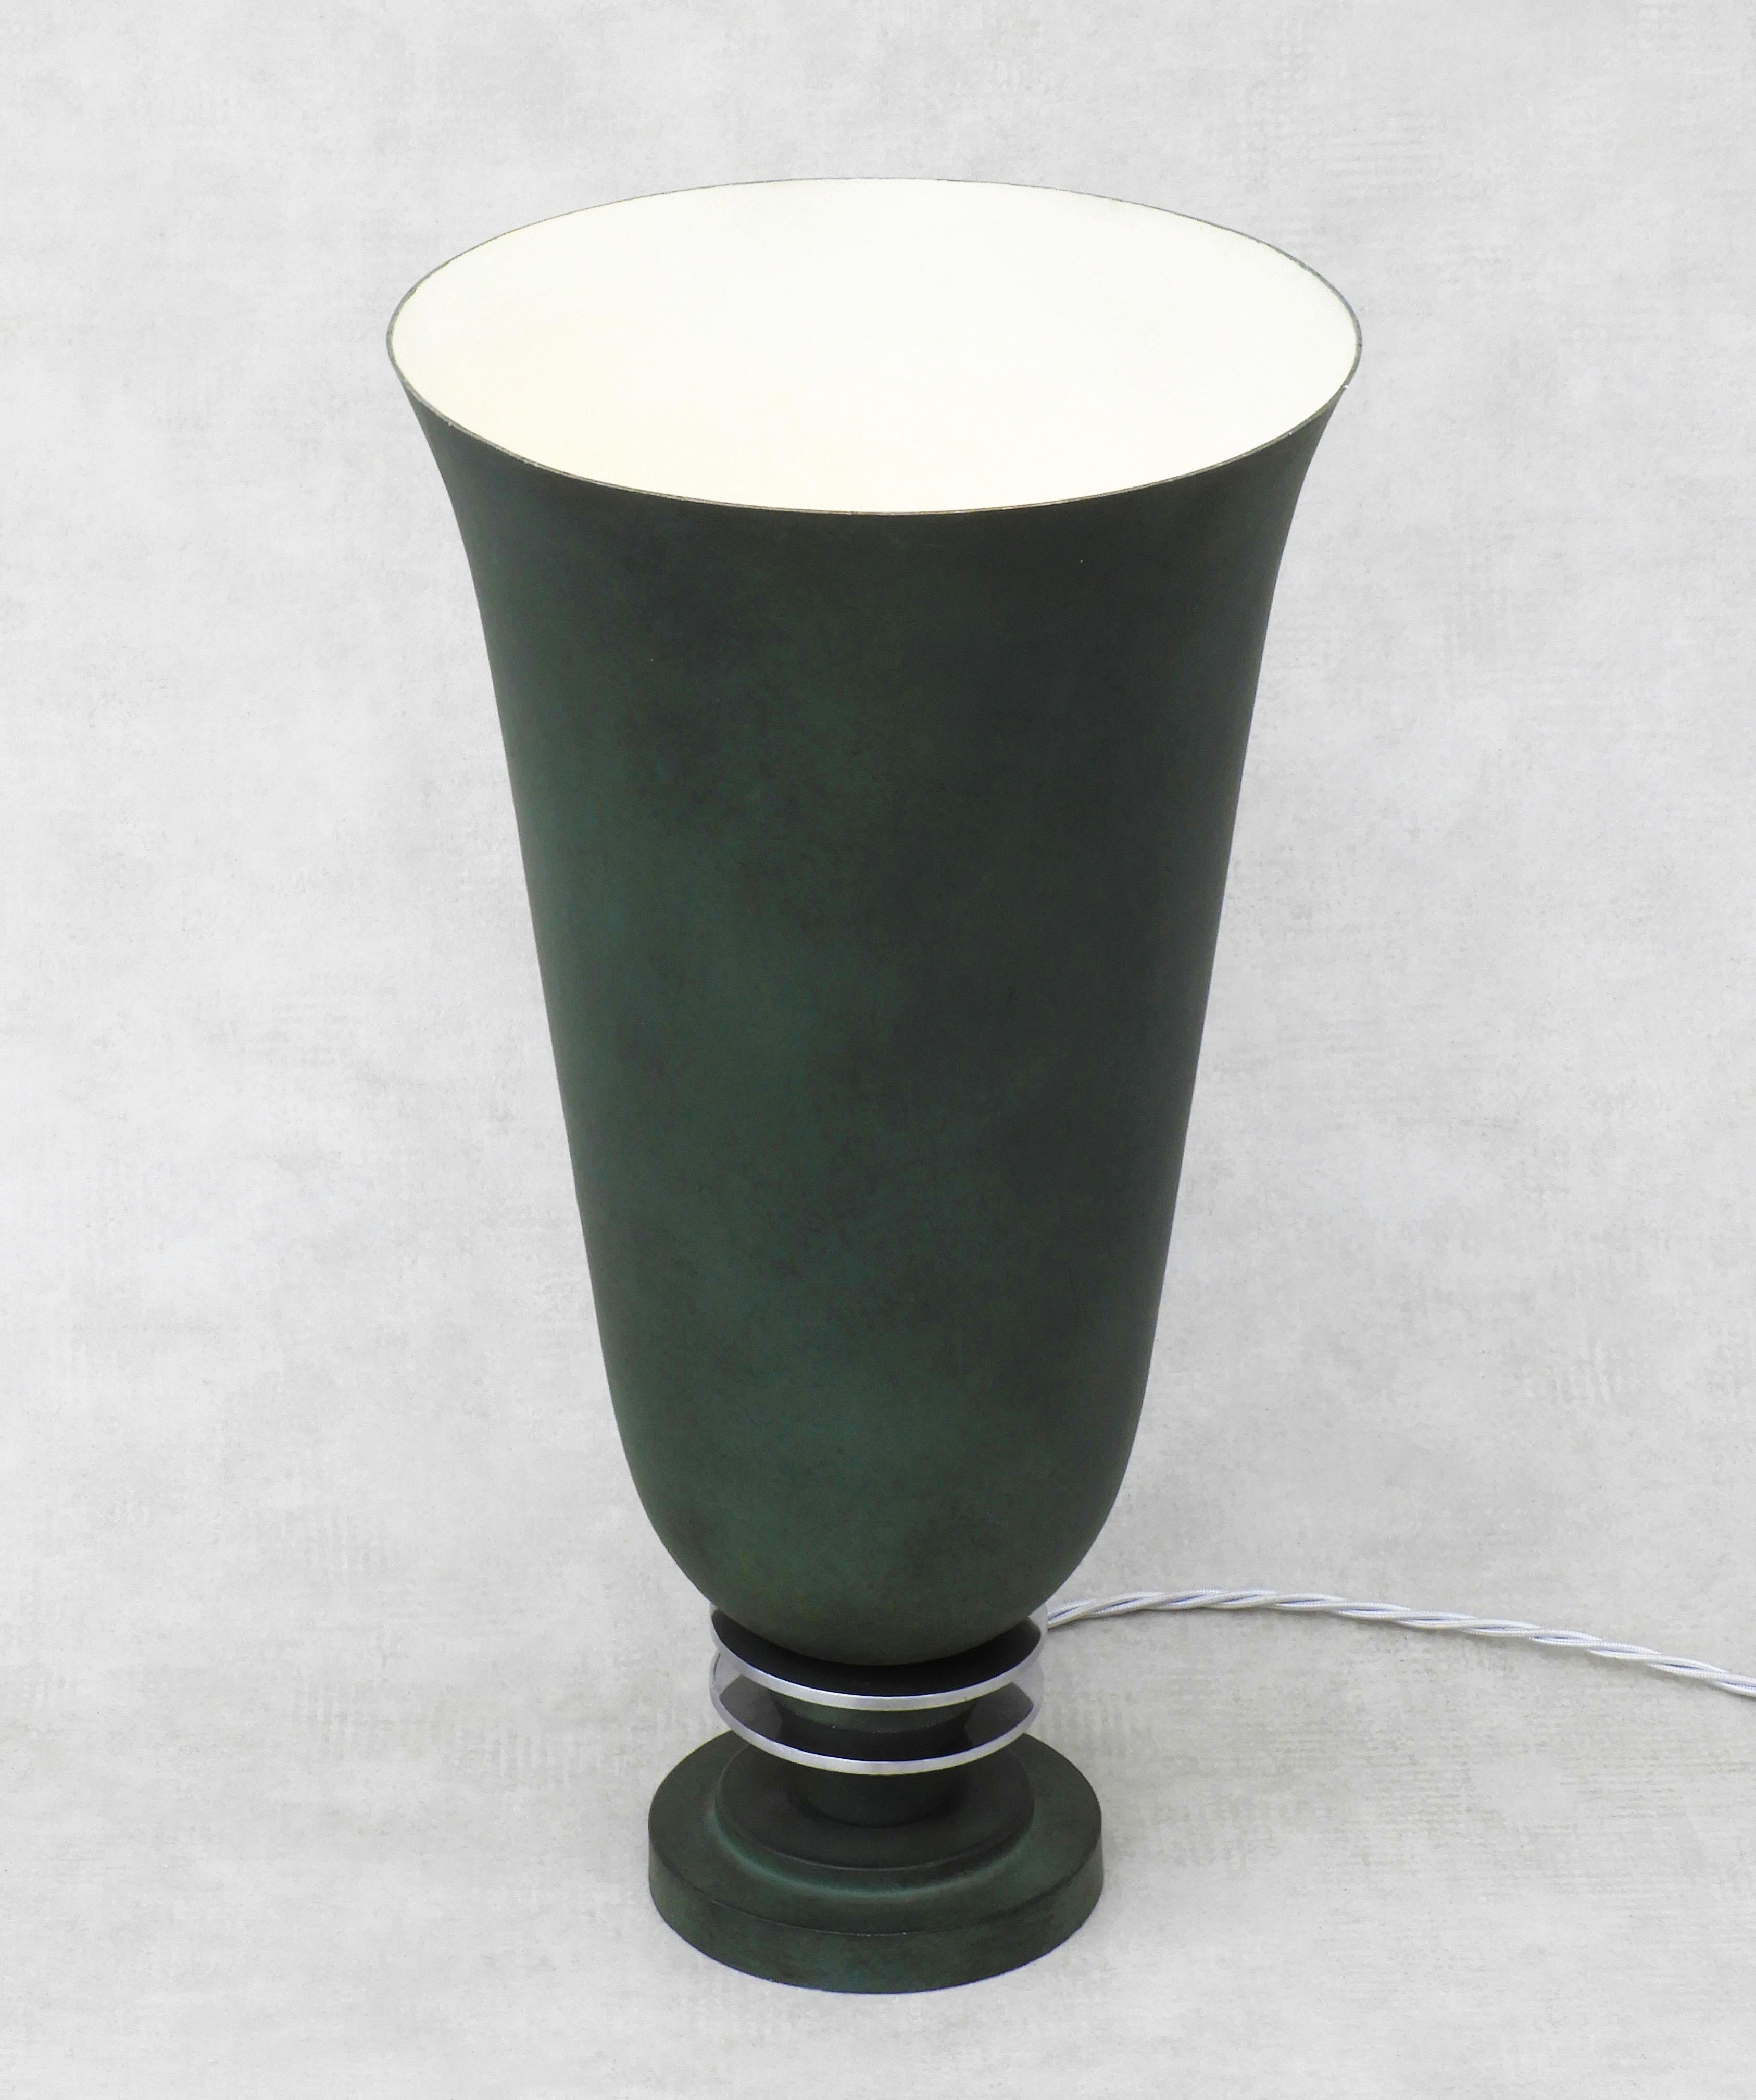 Mid-20th Century French Art Deco Urn Table Lamp circa 1930